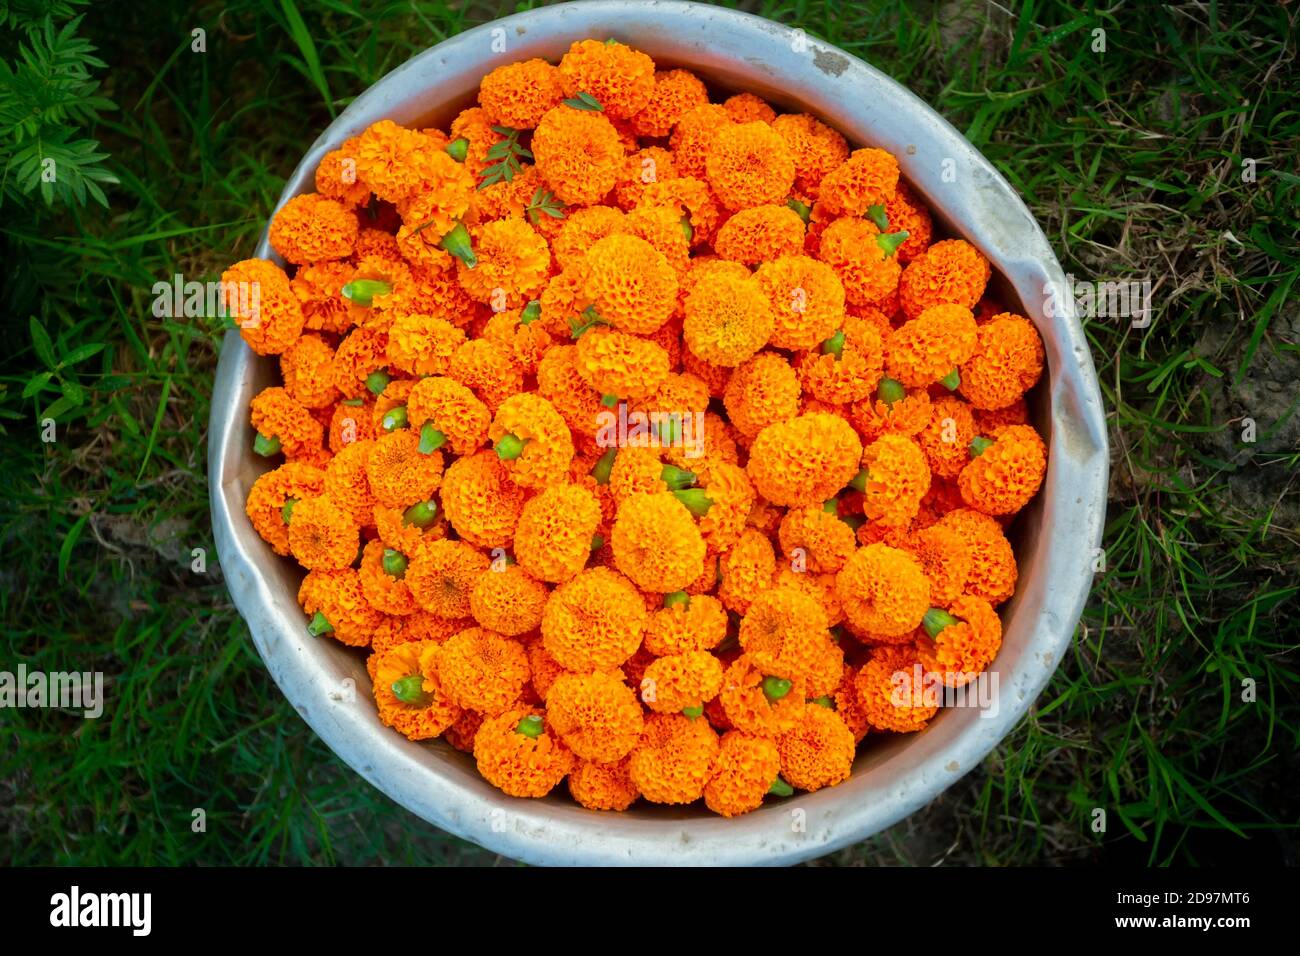 Marigold flowers are collected from the garden and stored in a silver container. Stock Photo